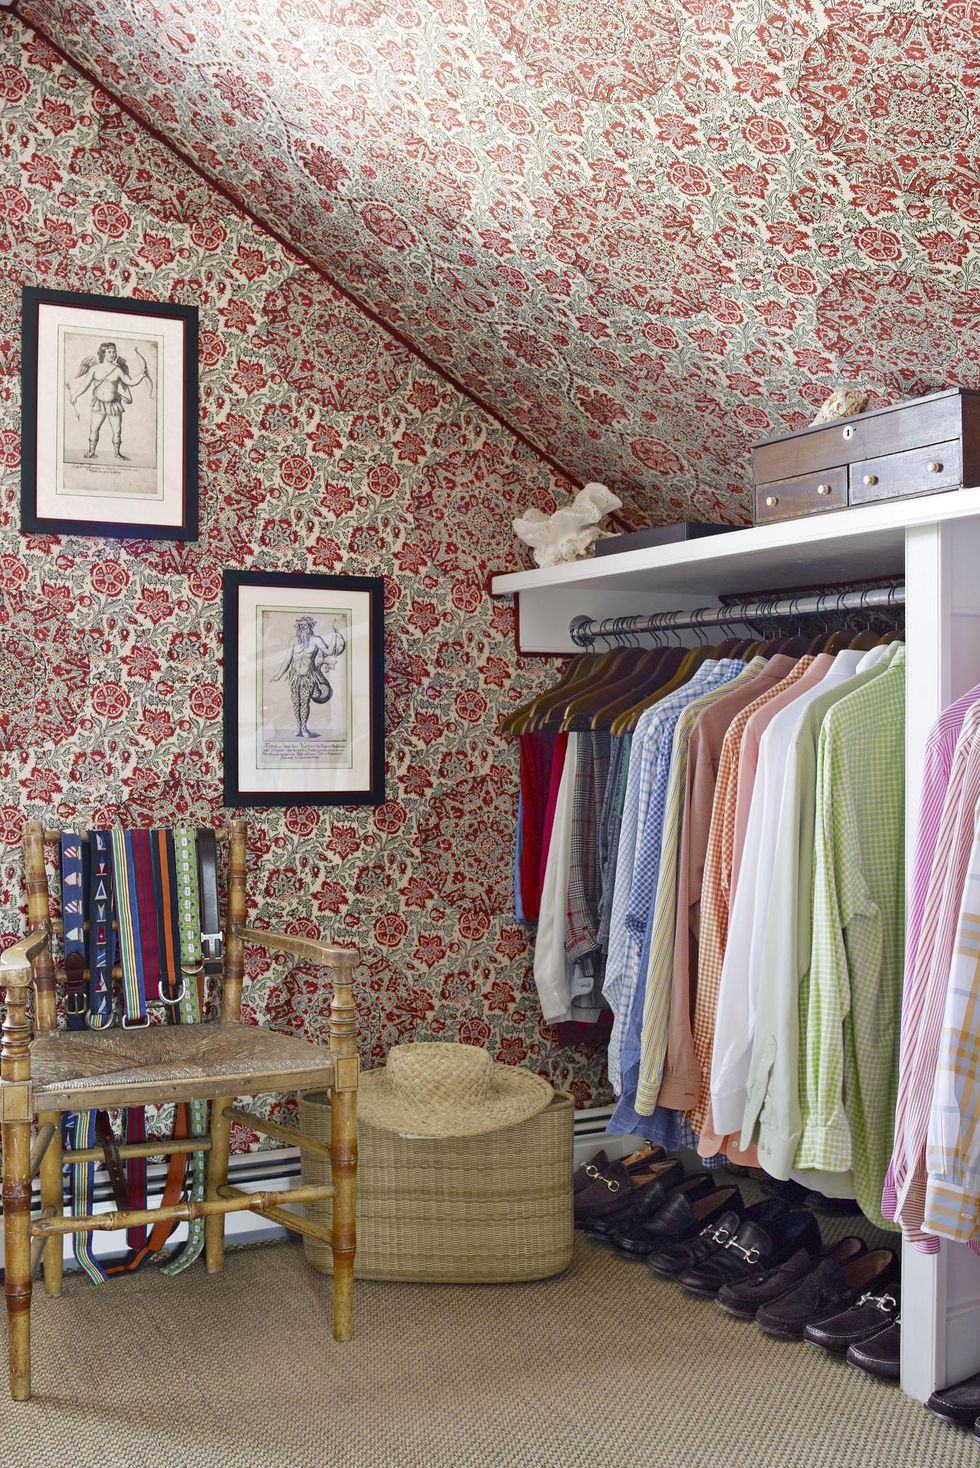 15 Clothes Storage Ideas For Small Spaces 